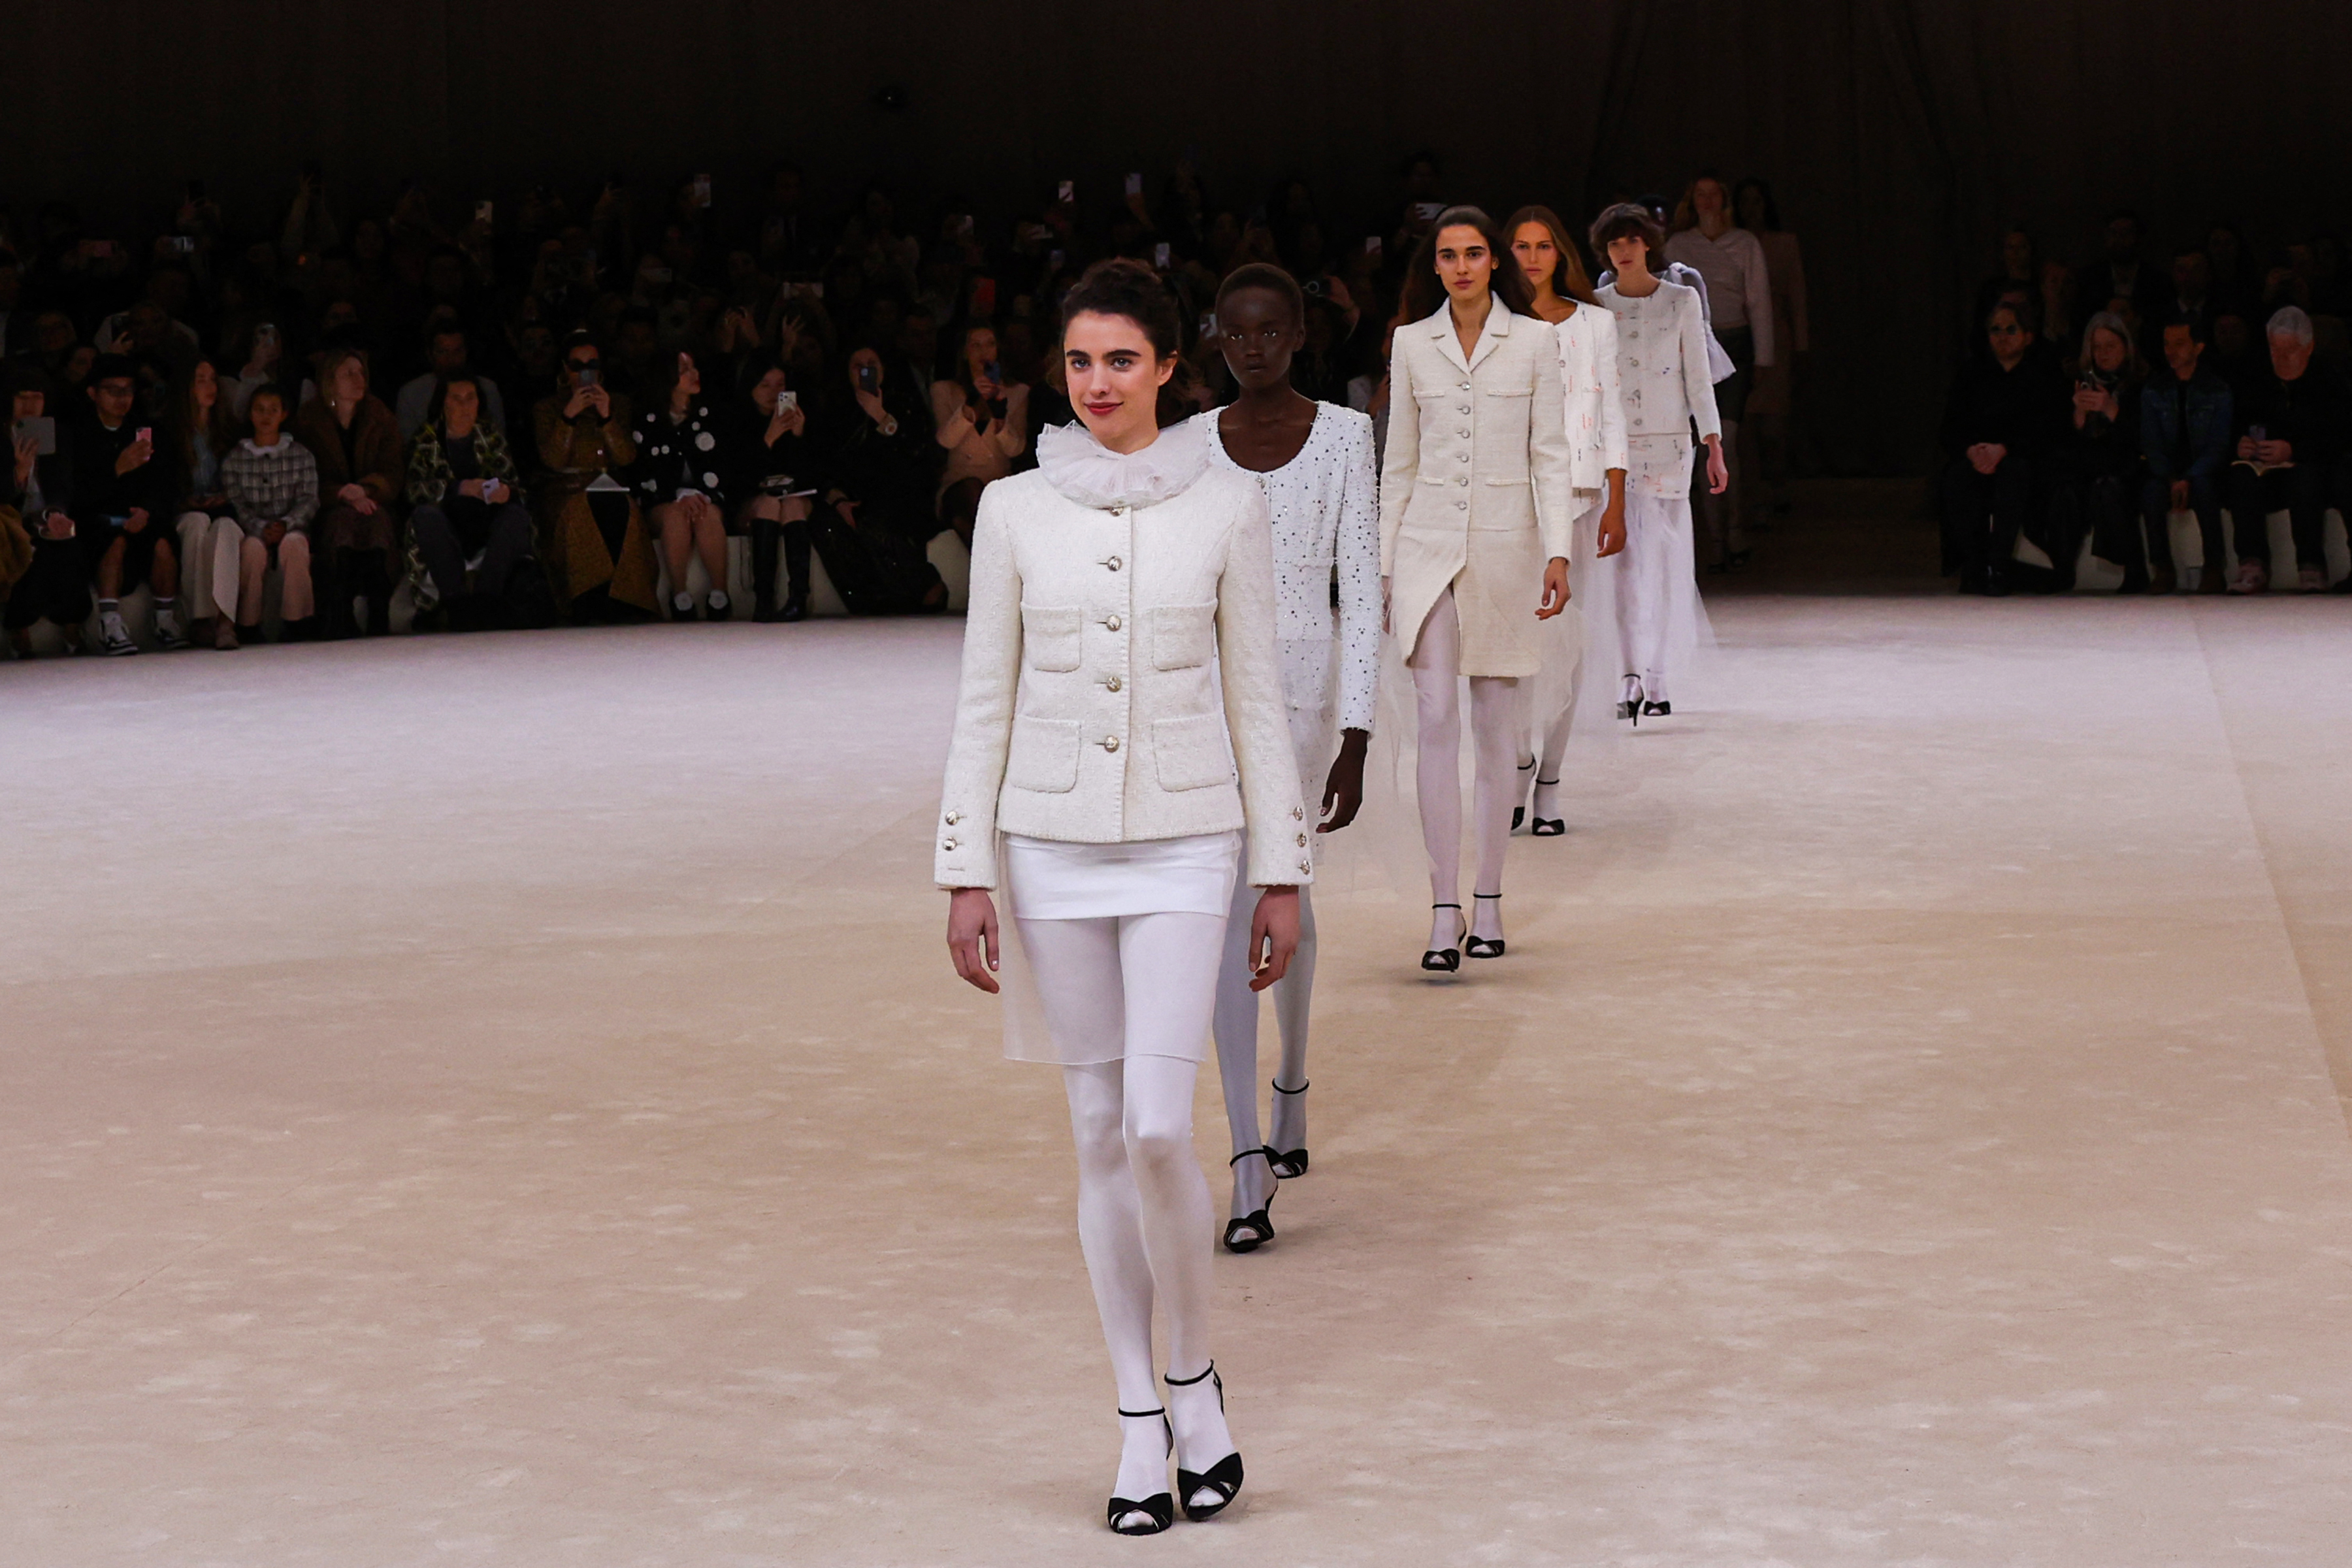 Chanel's spring couture show is a button-inspired ballet on the